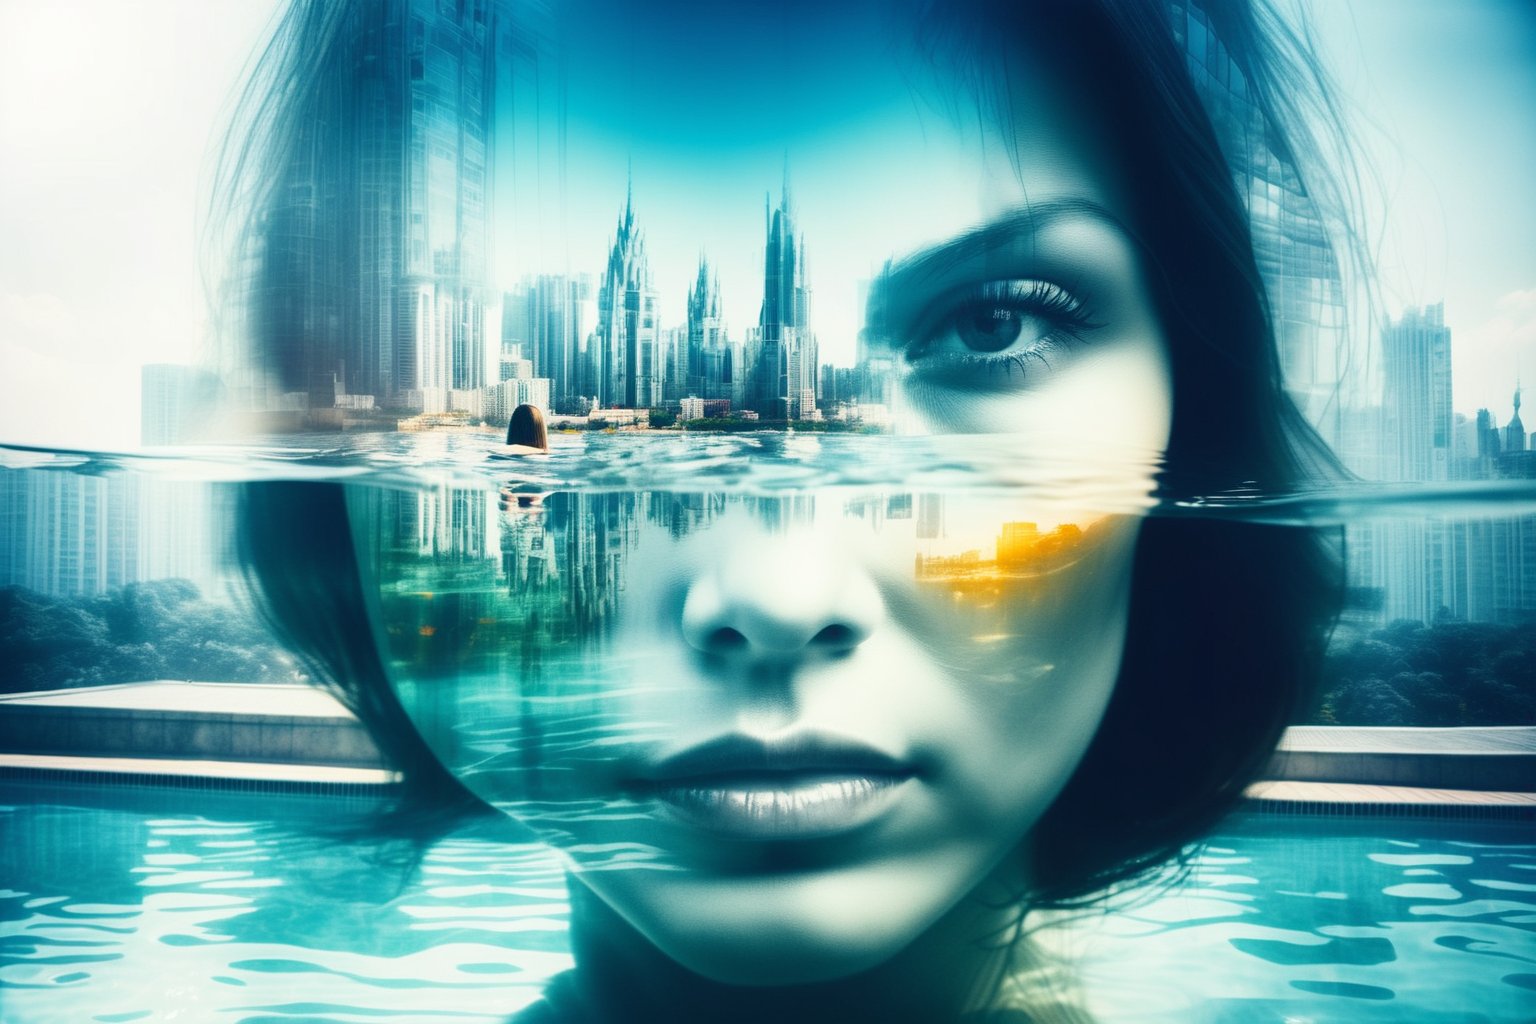 a very abstract double exposure view of a lady face, their head contains a swimming pool, with people swiming in the pool in their head, city backdrop